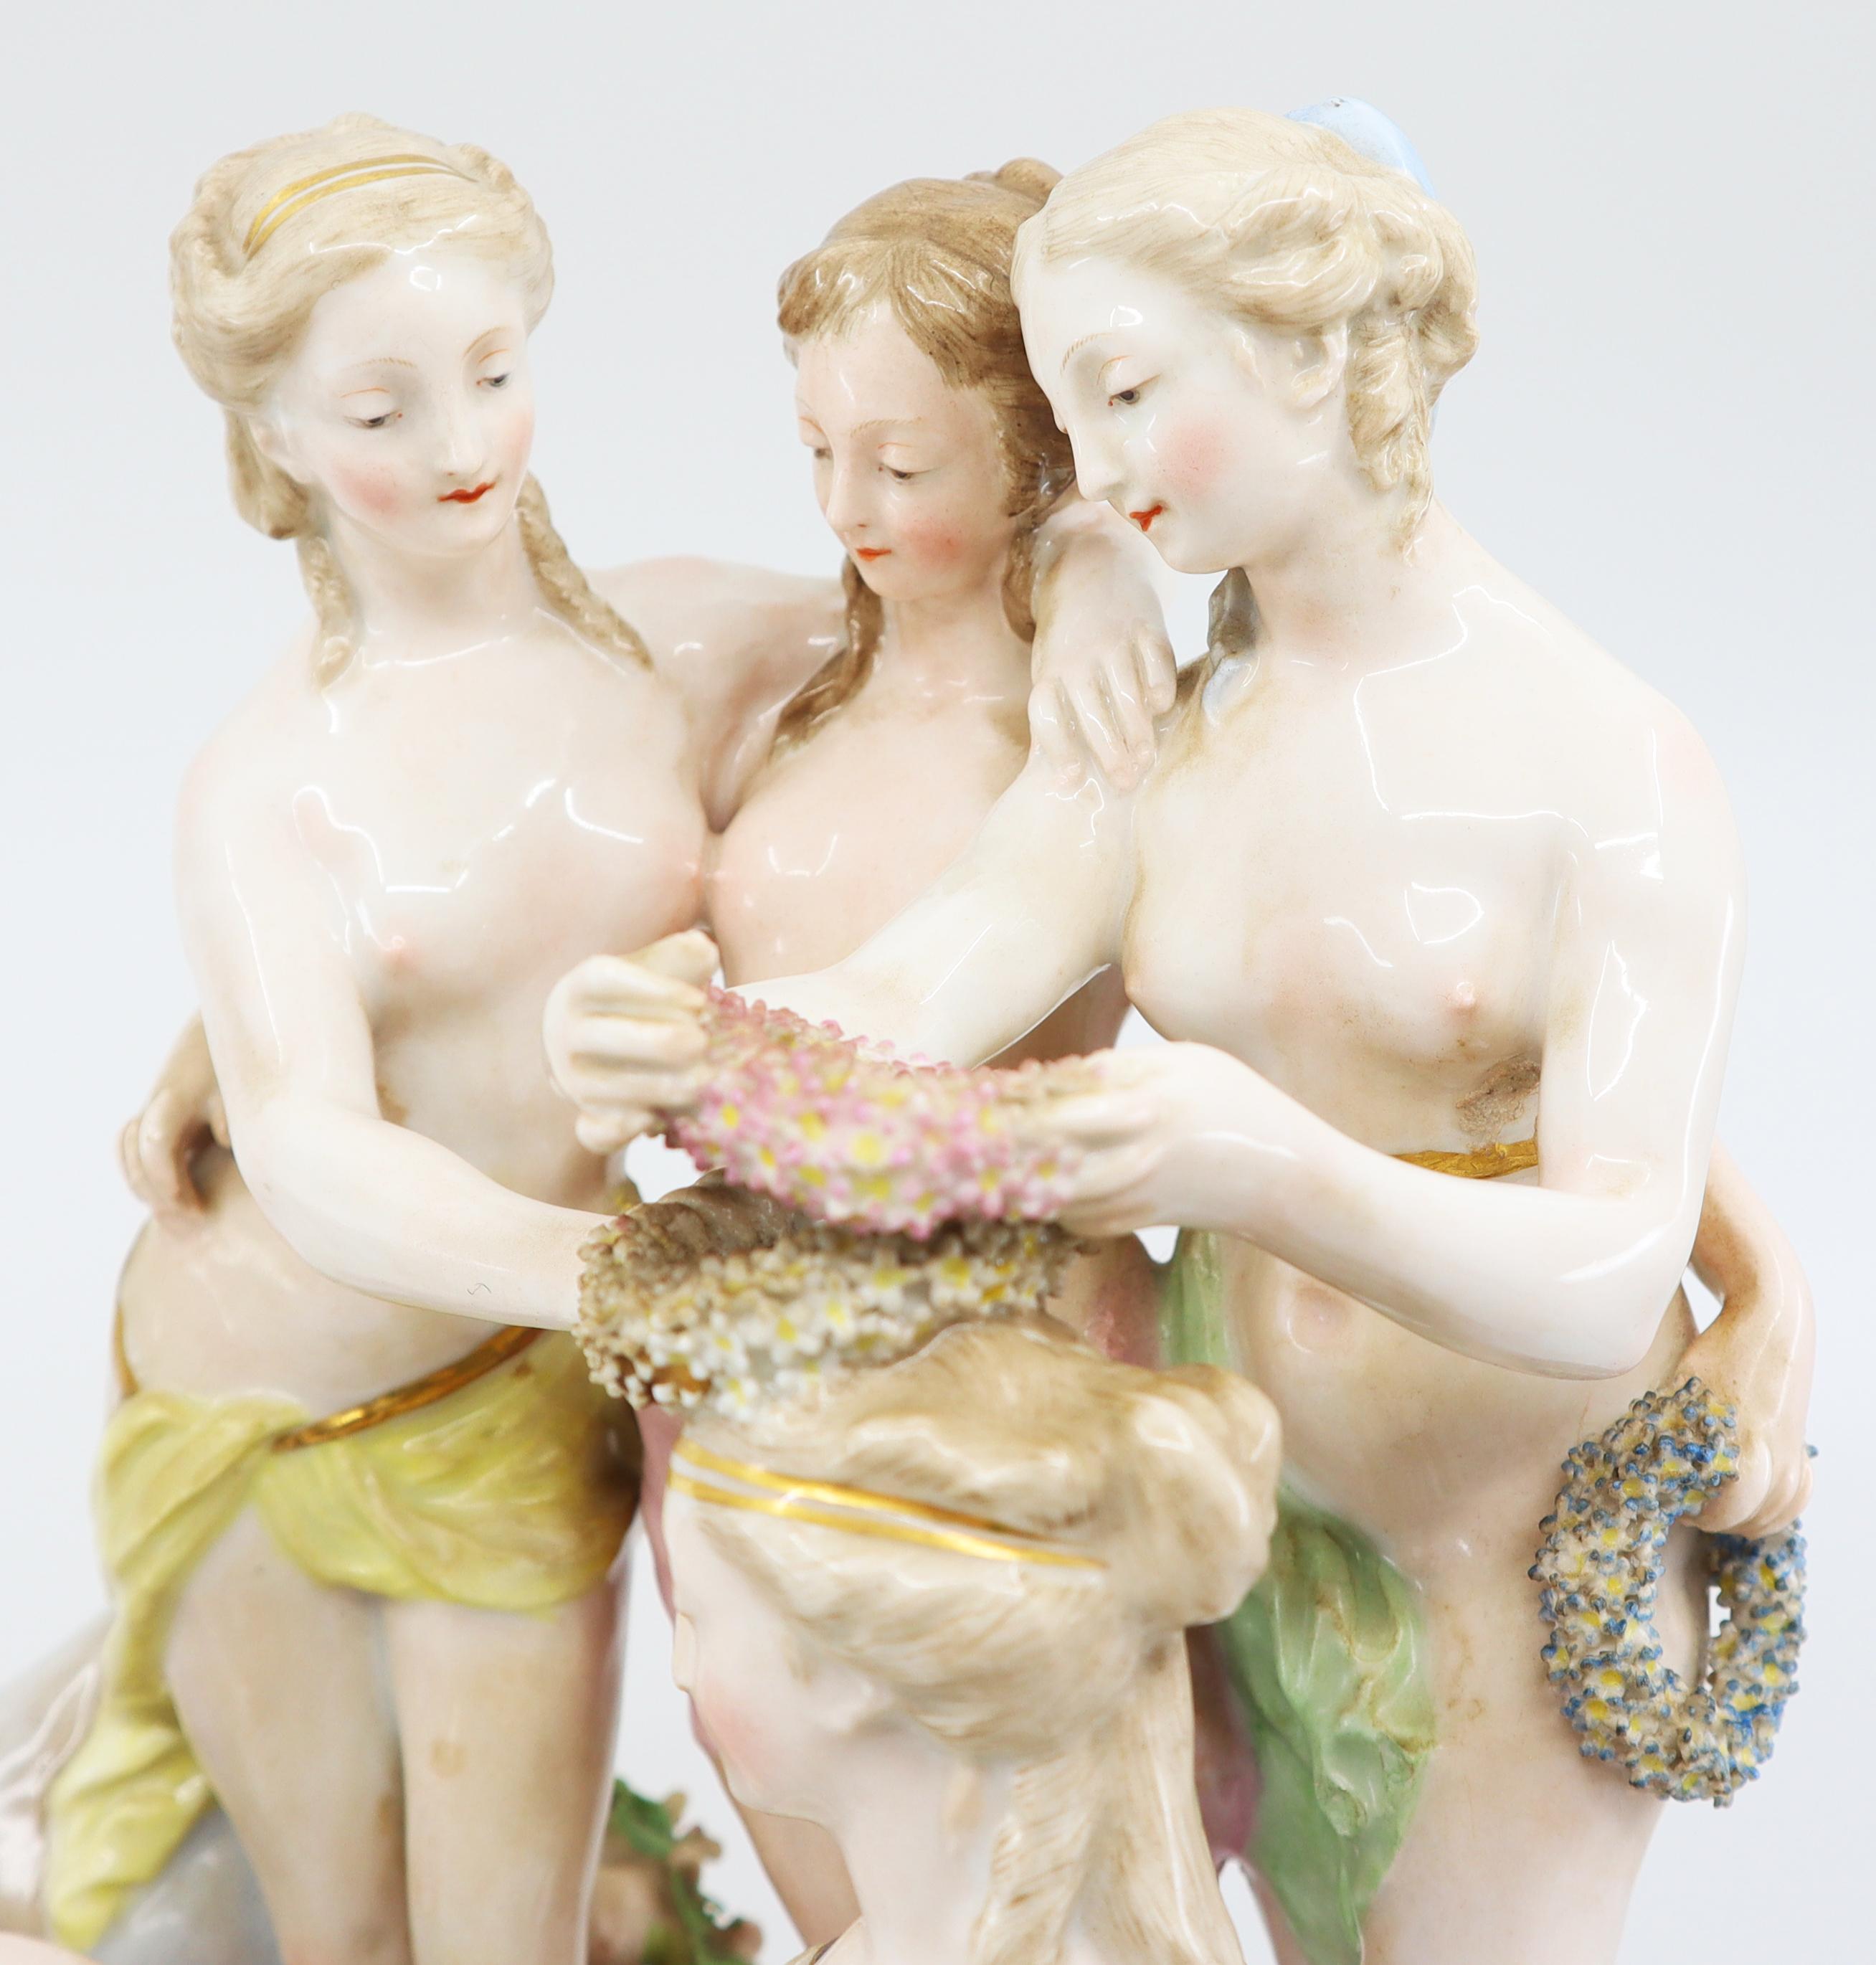 Porcelain Figure Group of Venus and Muses Samson 19th Century, Sevres French In Good Condition For Sale In Lantau, HK